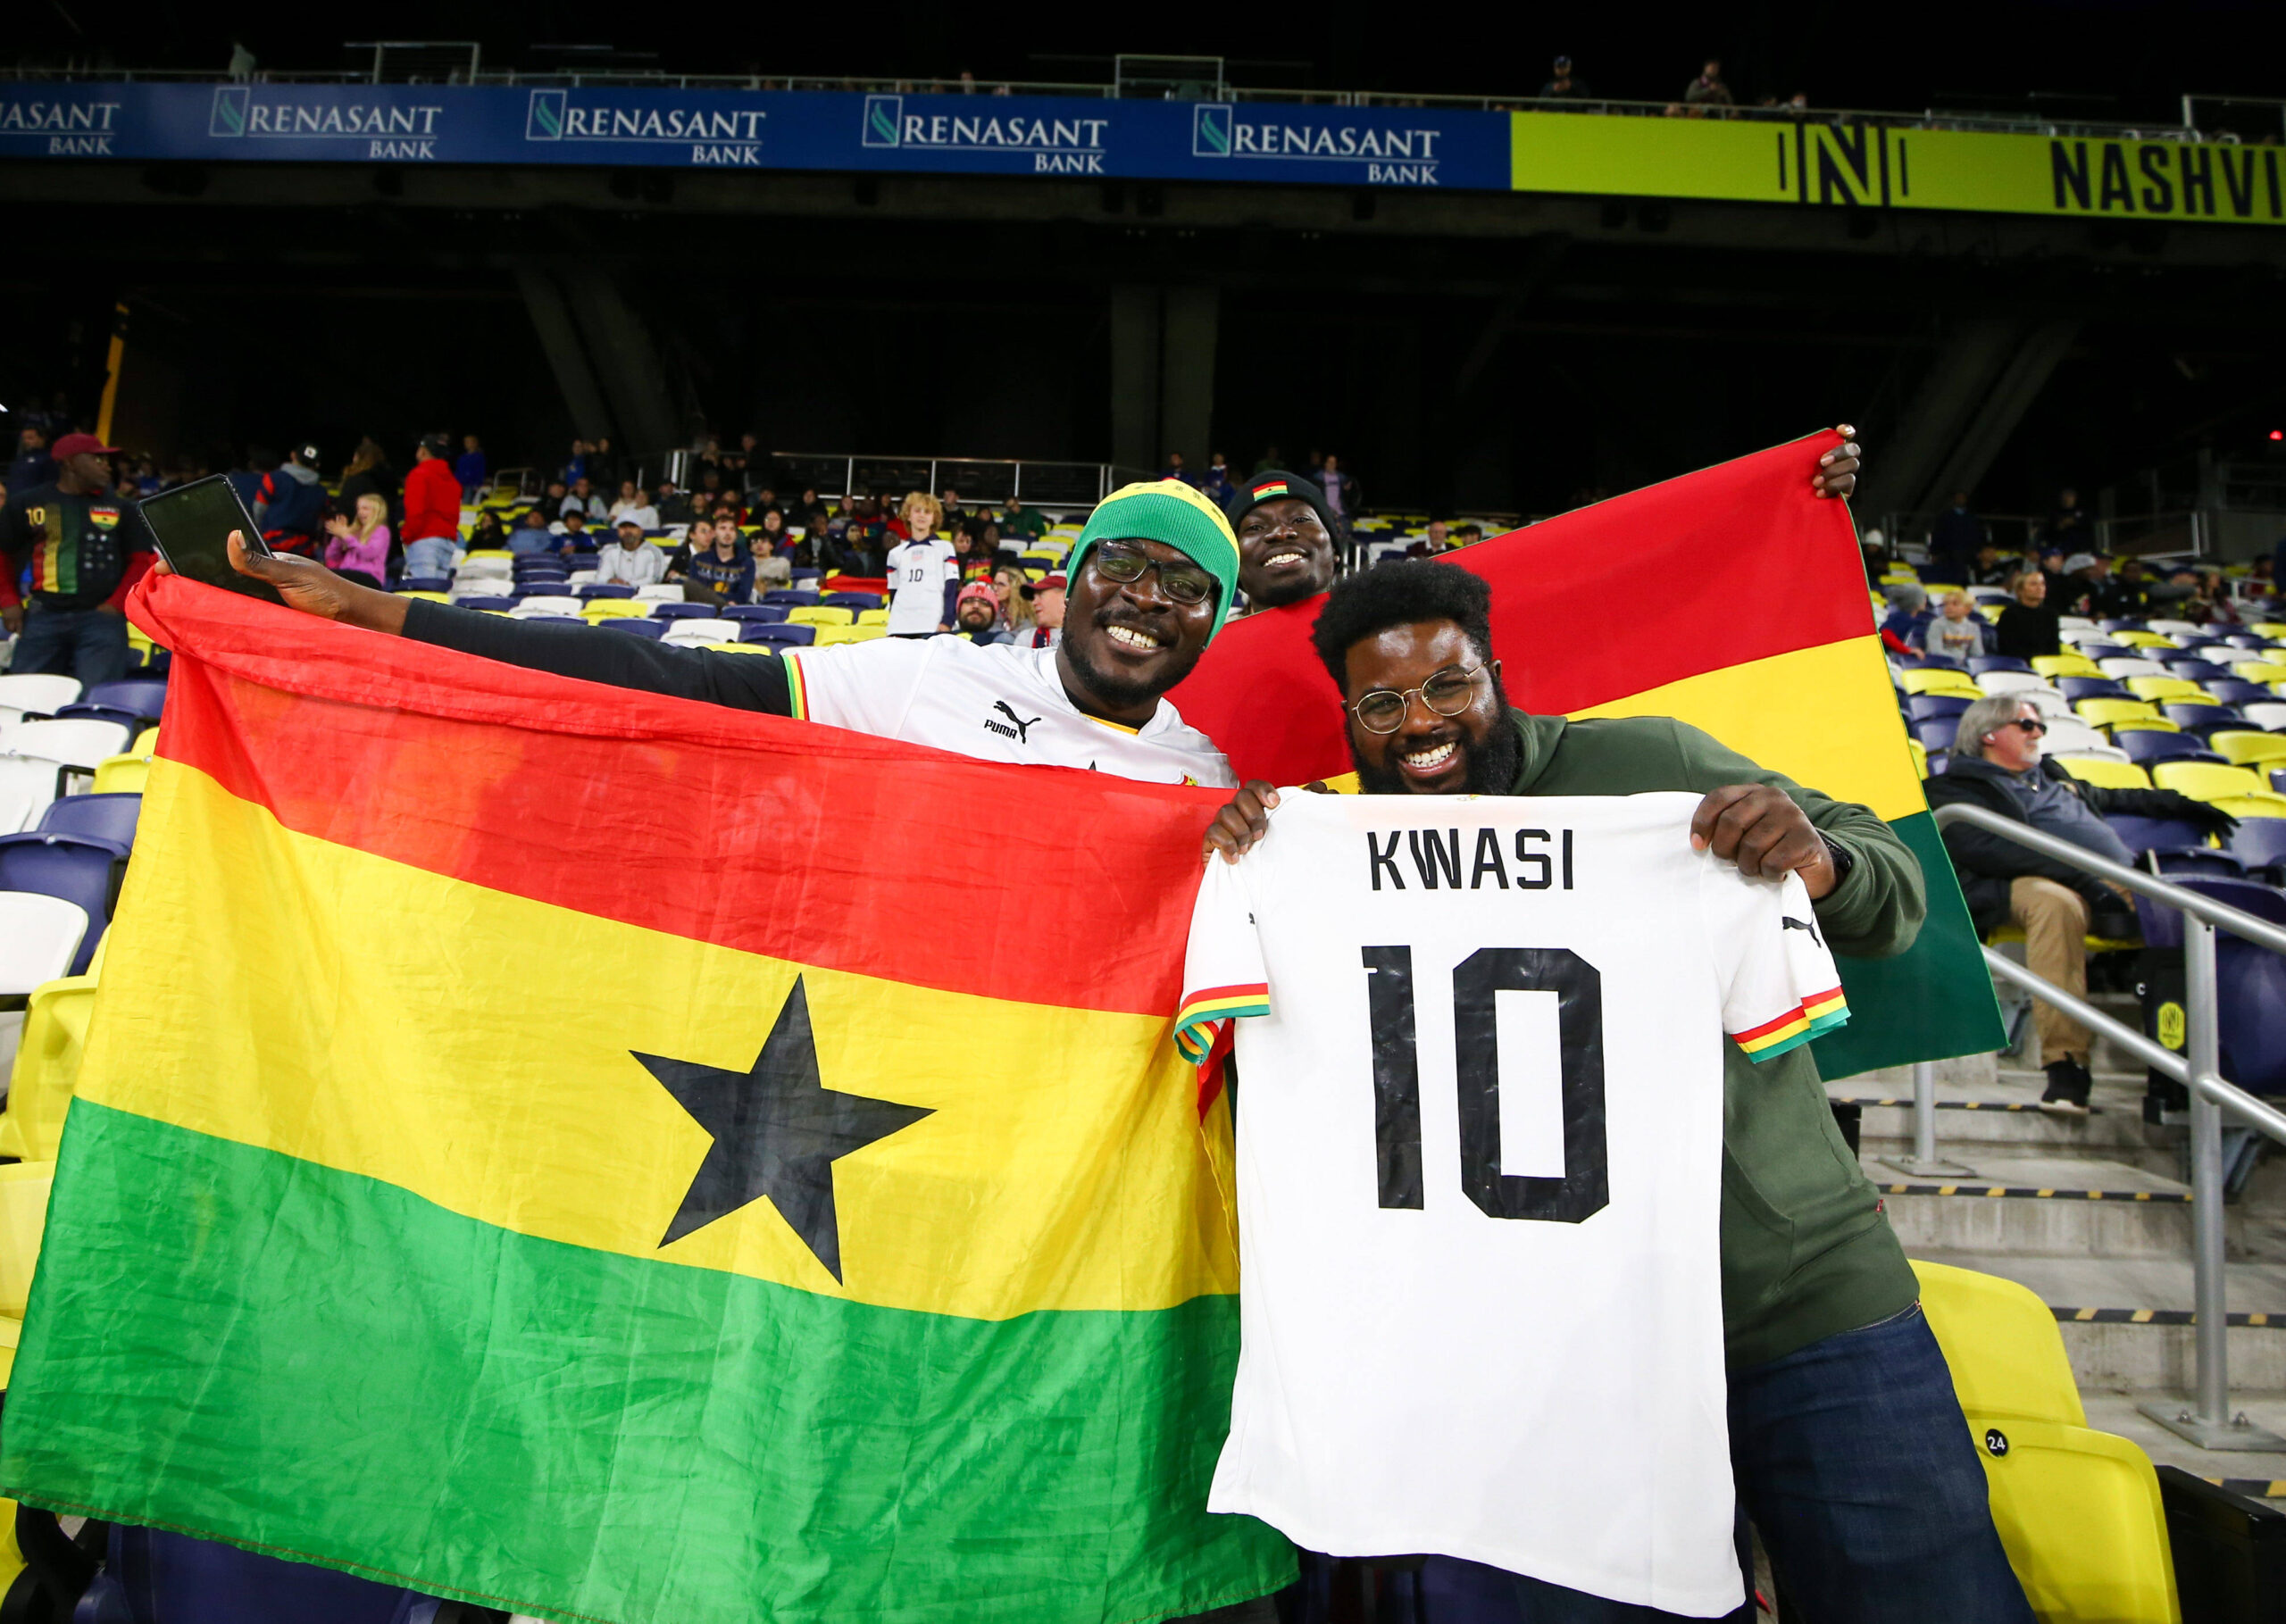 Ghana fans in the stands with a flag and player jerseys ahead of a Friendly